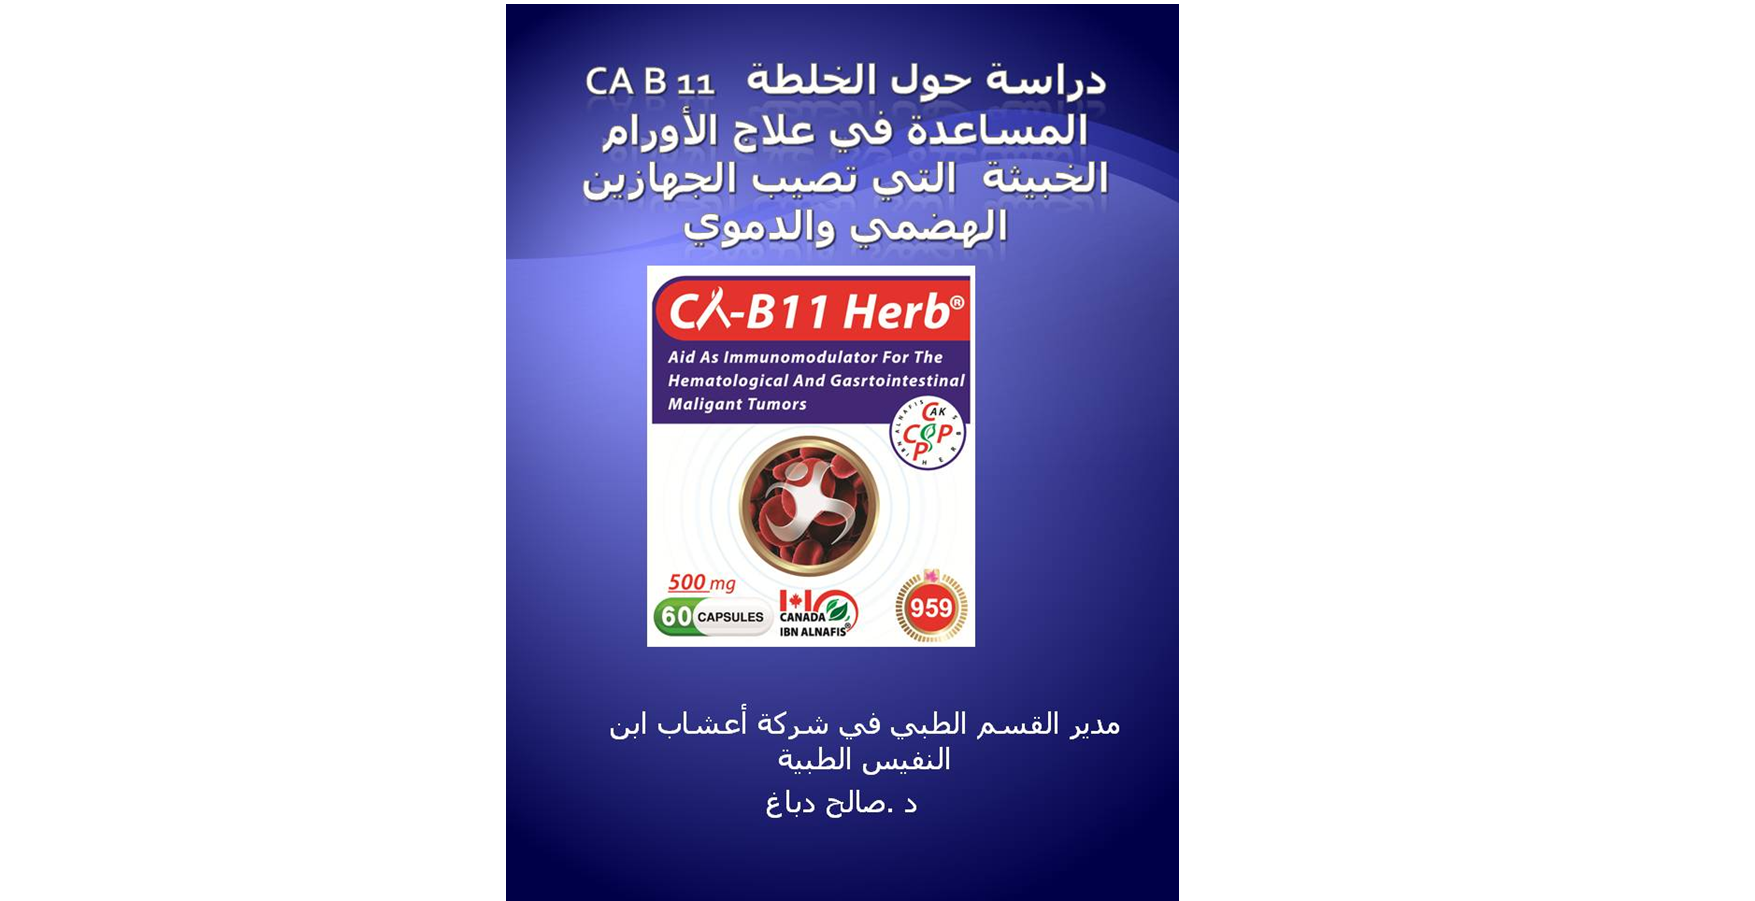 MEDICAL STUDY ABOUT THE MIXTURE CA B 11 ABOUT CANCER TREATMENT